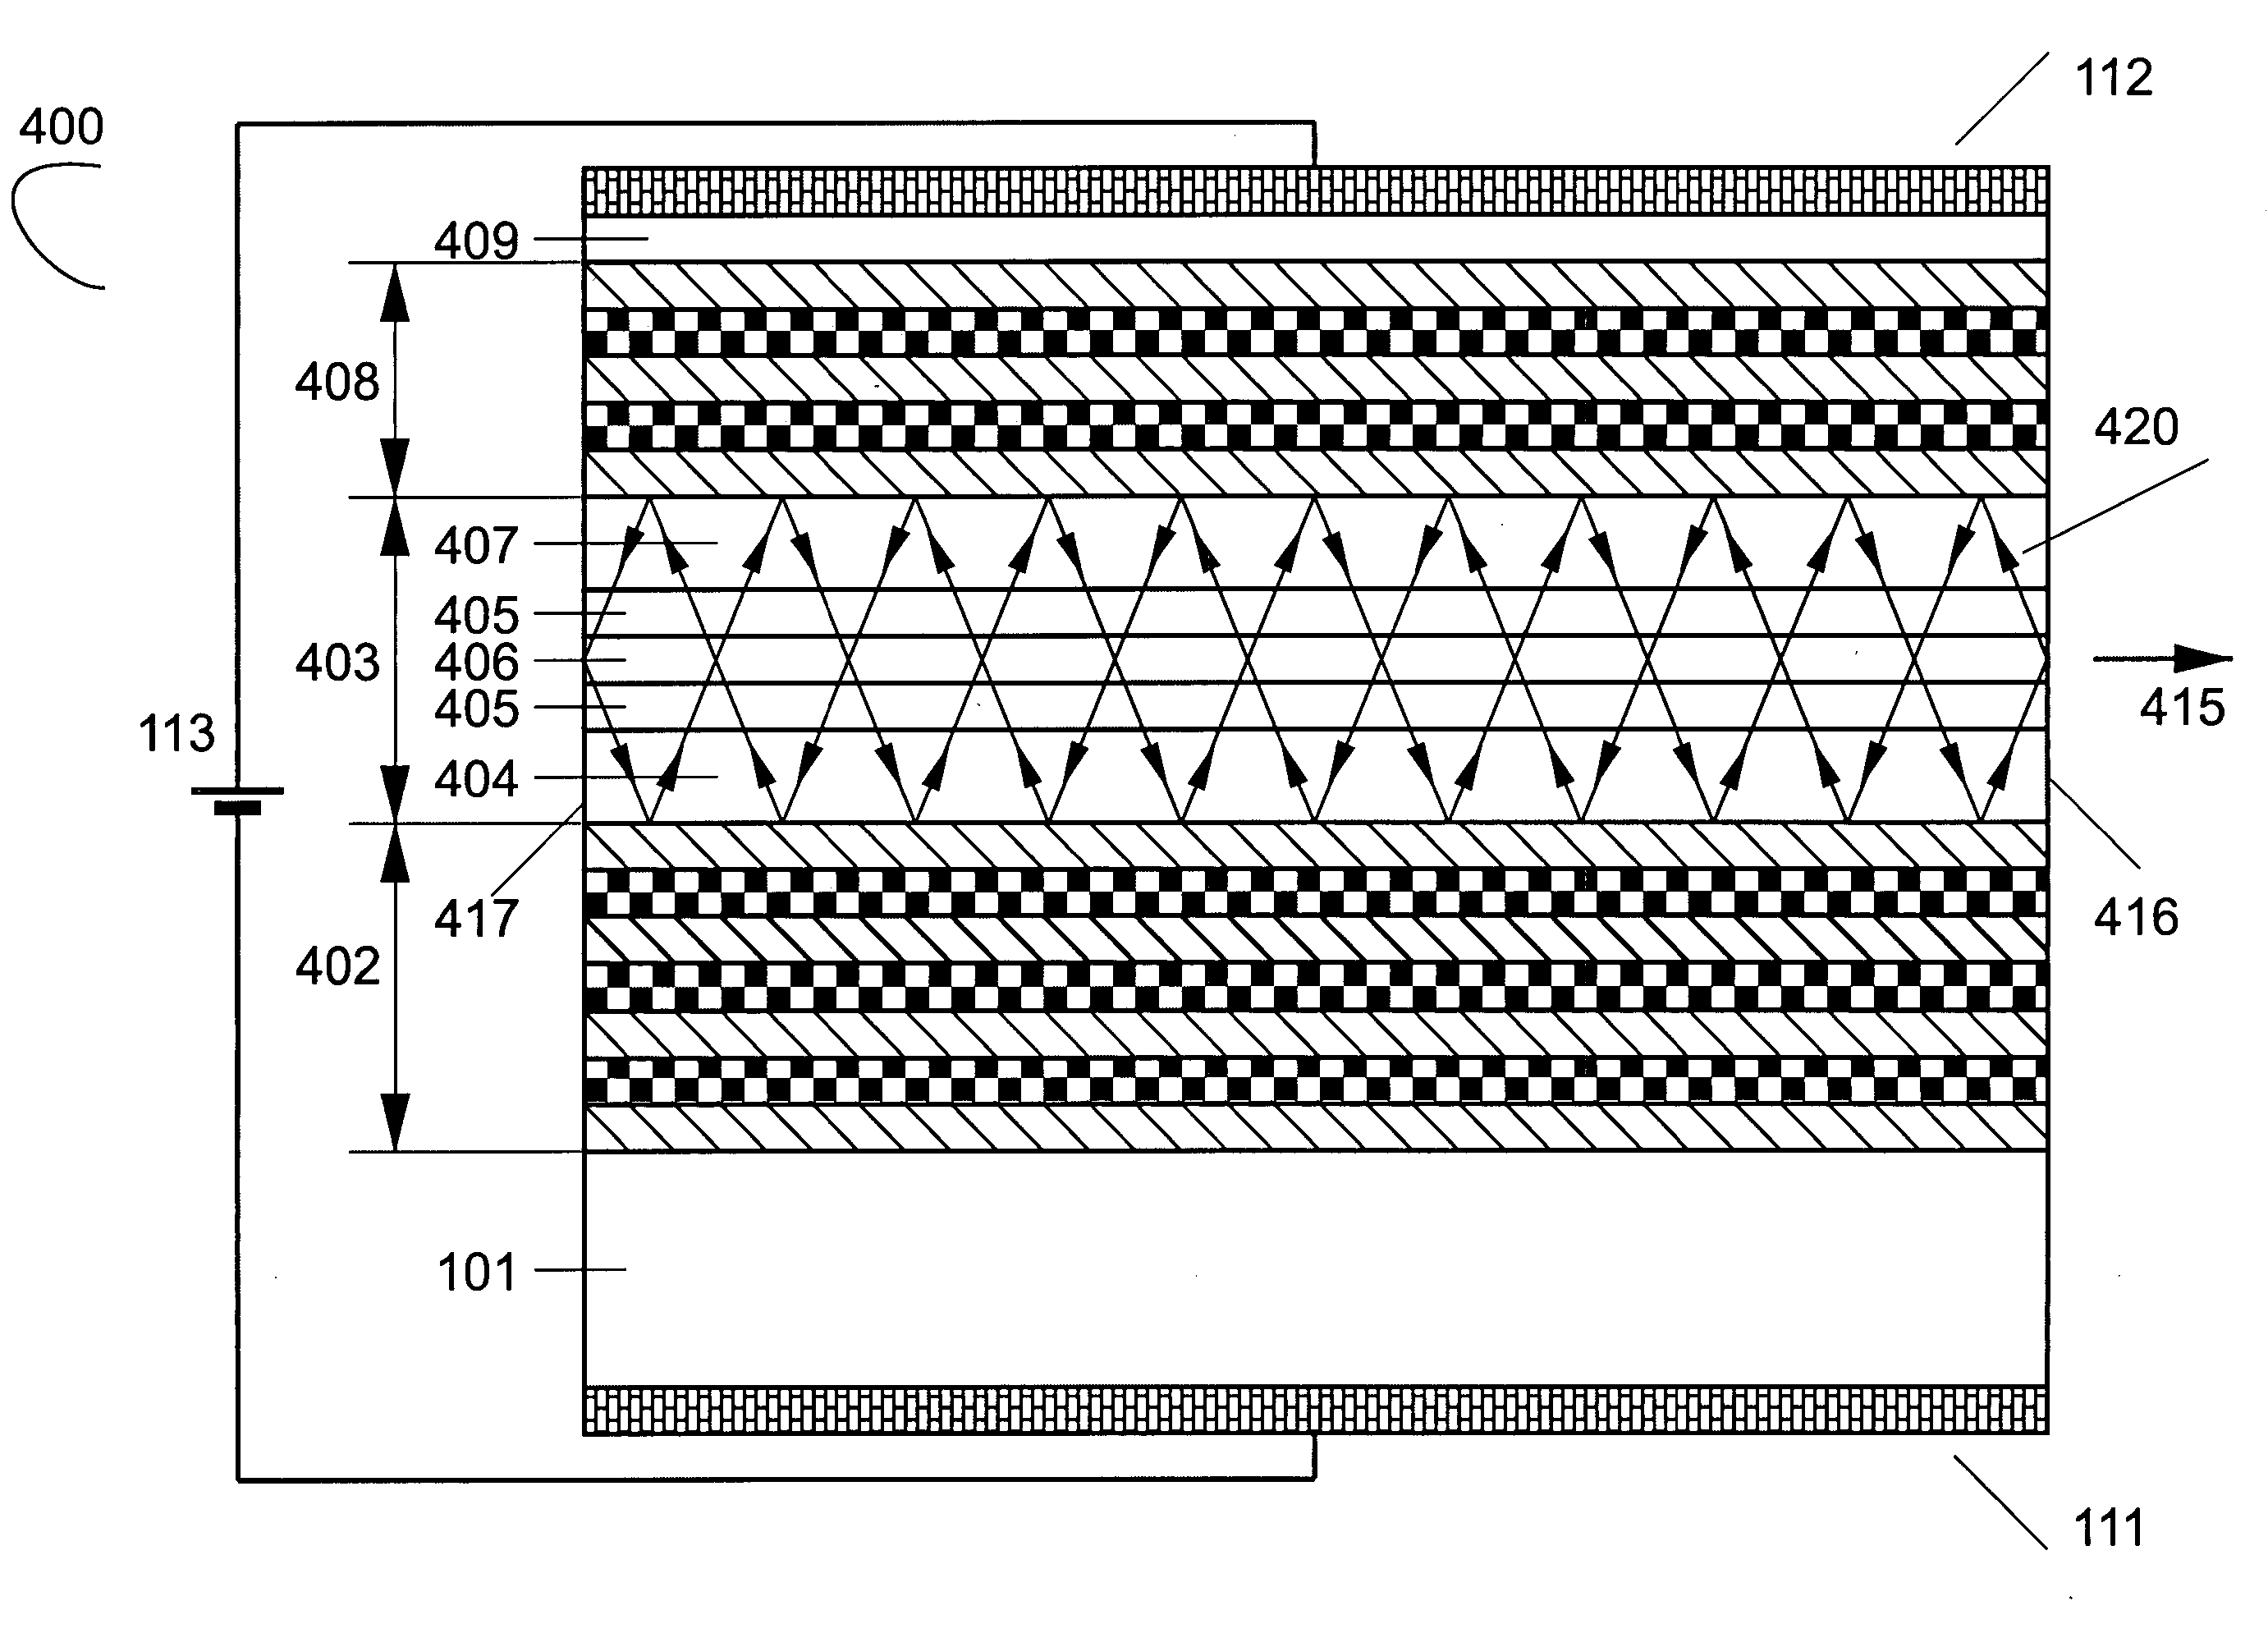 Tilted cavity semiconductor optoelectronic device and method of making same